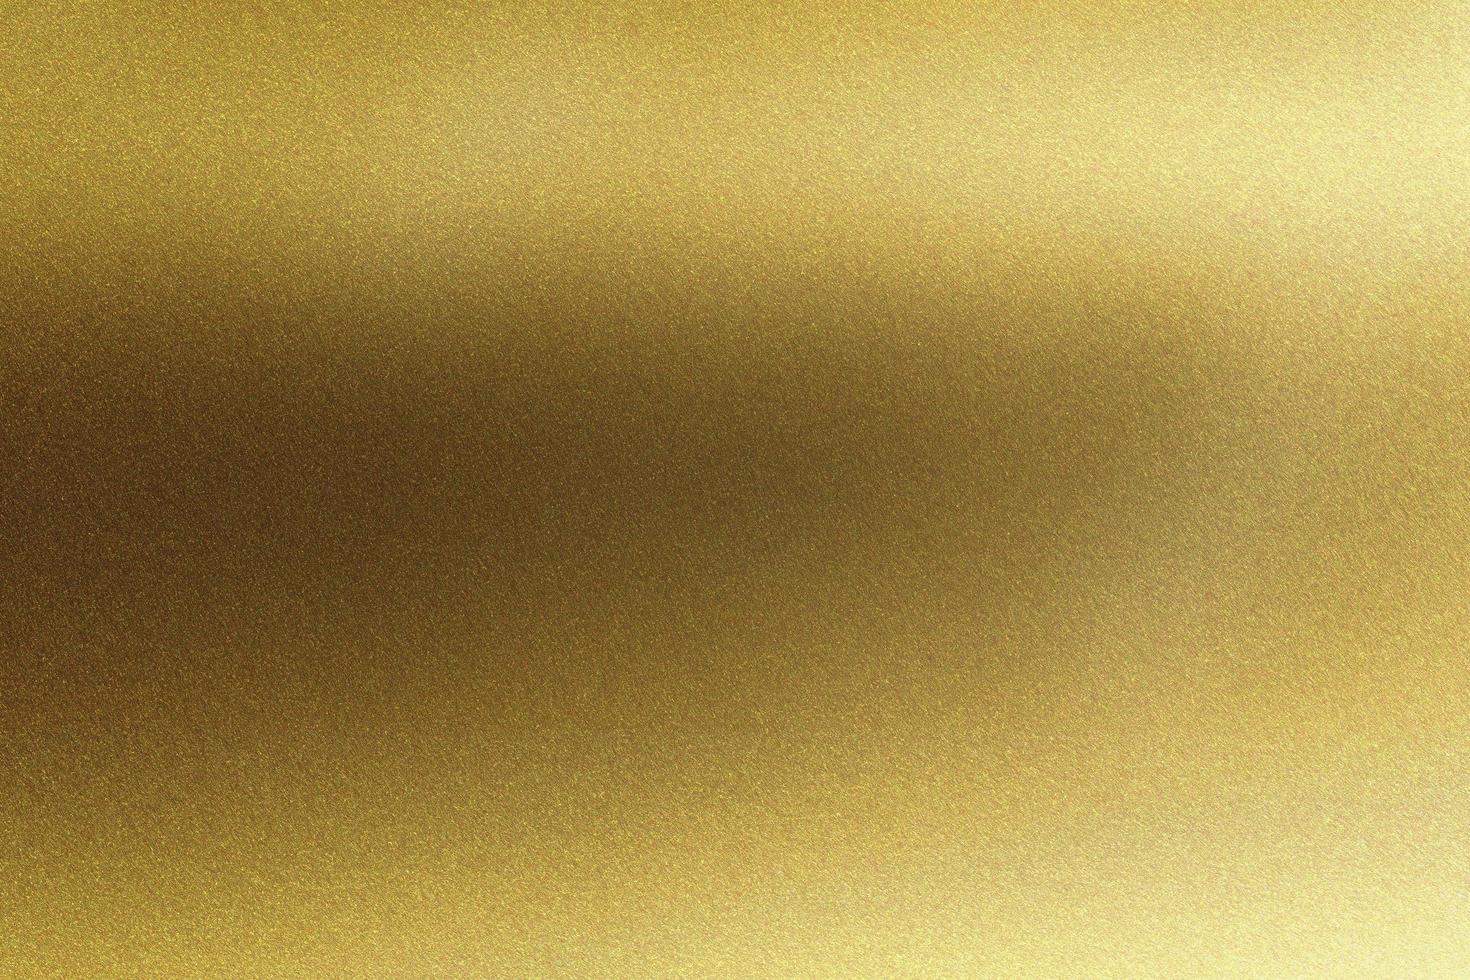 Abstract texture background, shiny polished gold metallic plate photo